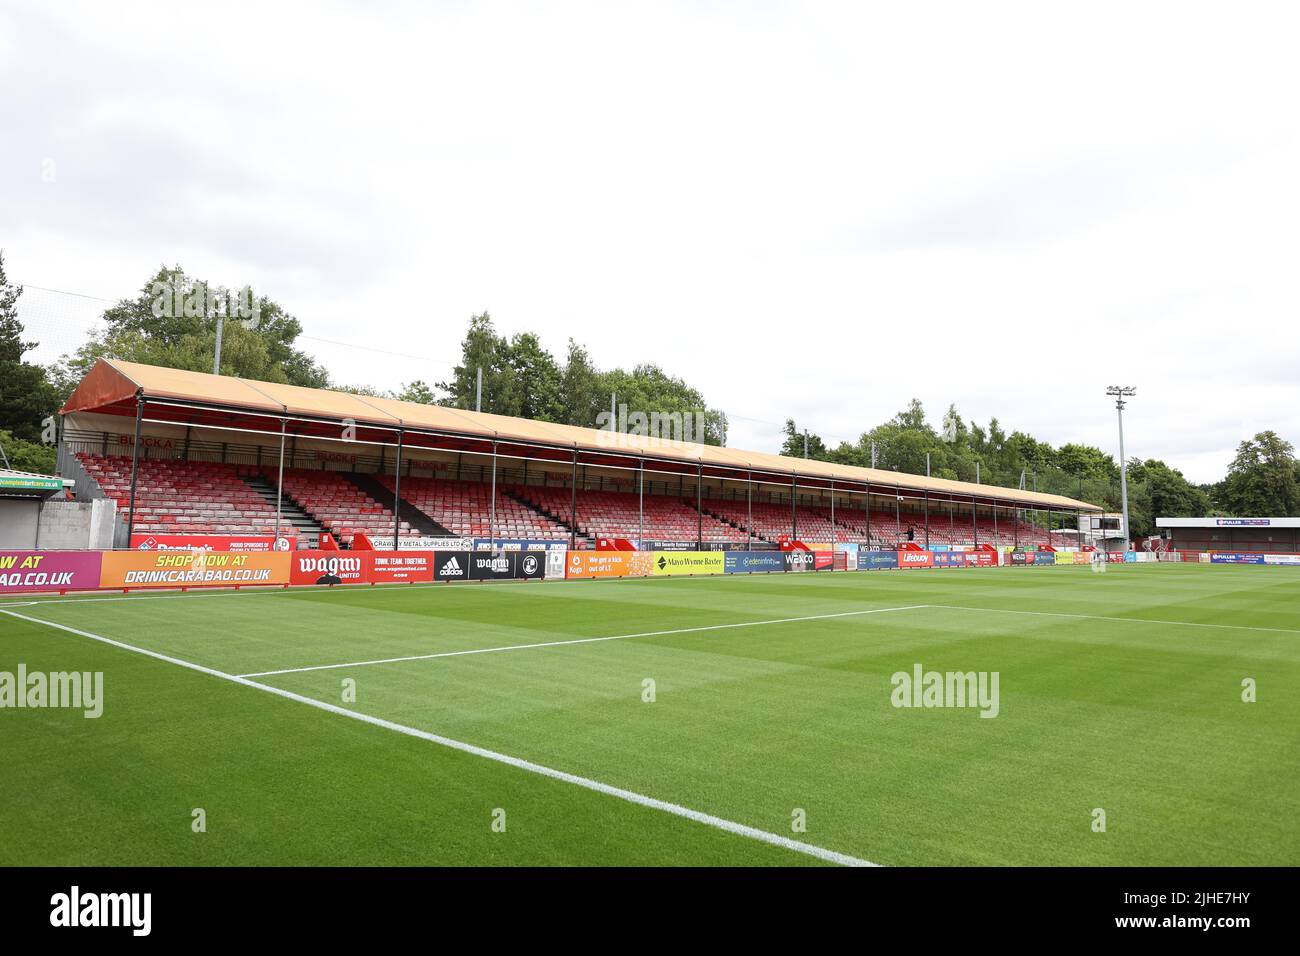 Crawley, UK : 7th July 2022 :  General view of the Broadfield Stadium before the pre-season friendly between Crawley Town and Queens Park Rangers at the Broadfield Stadium in Crawley.Crawley, UK : 7th July 2022 :  General view of the Broadfield Stadium formerly the People’s Pension Stadium before the pre-season friendly between Crawley Town and Queens Park Rangers at the Broadfield Stadium in Crawley. Stock Photo